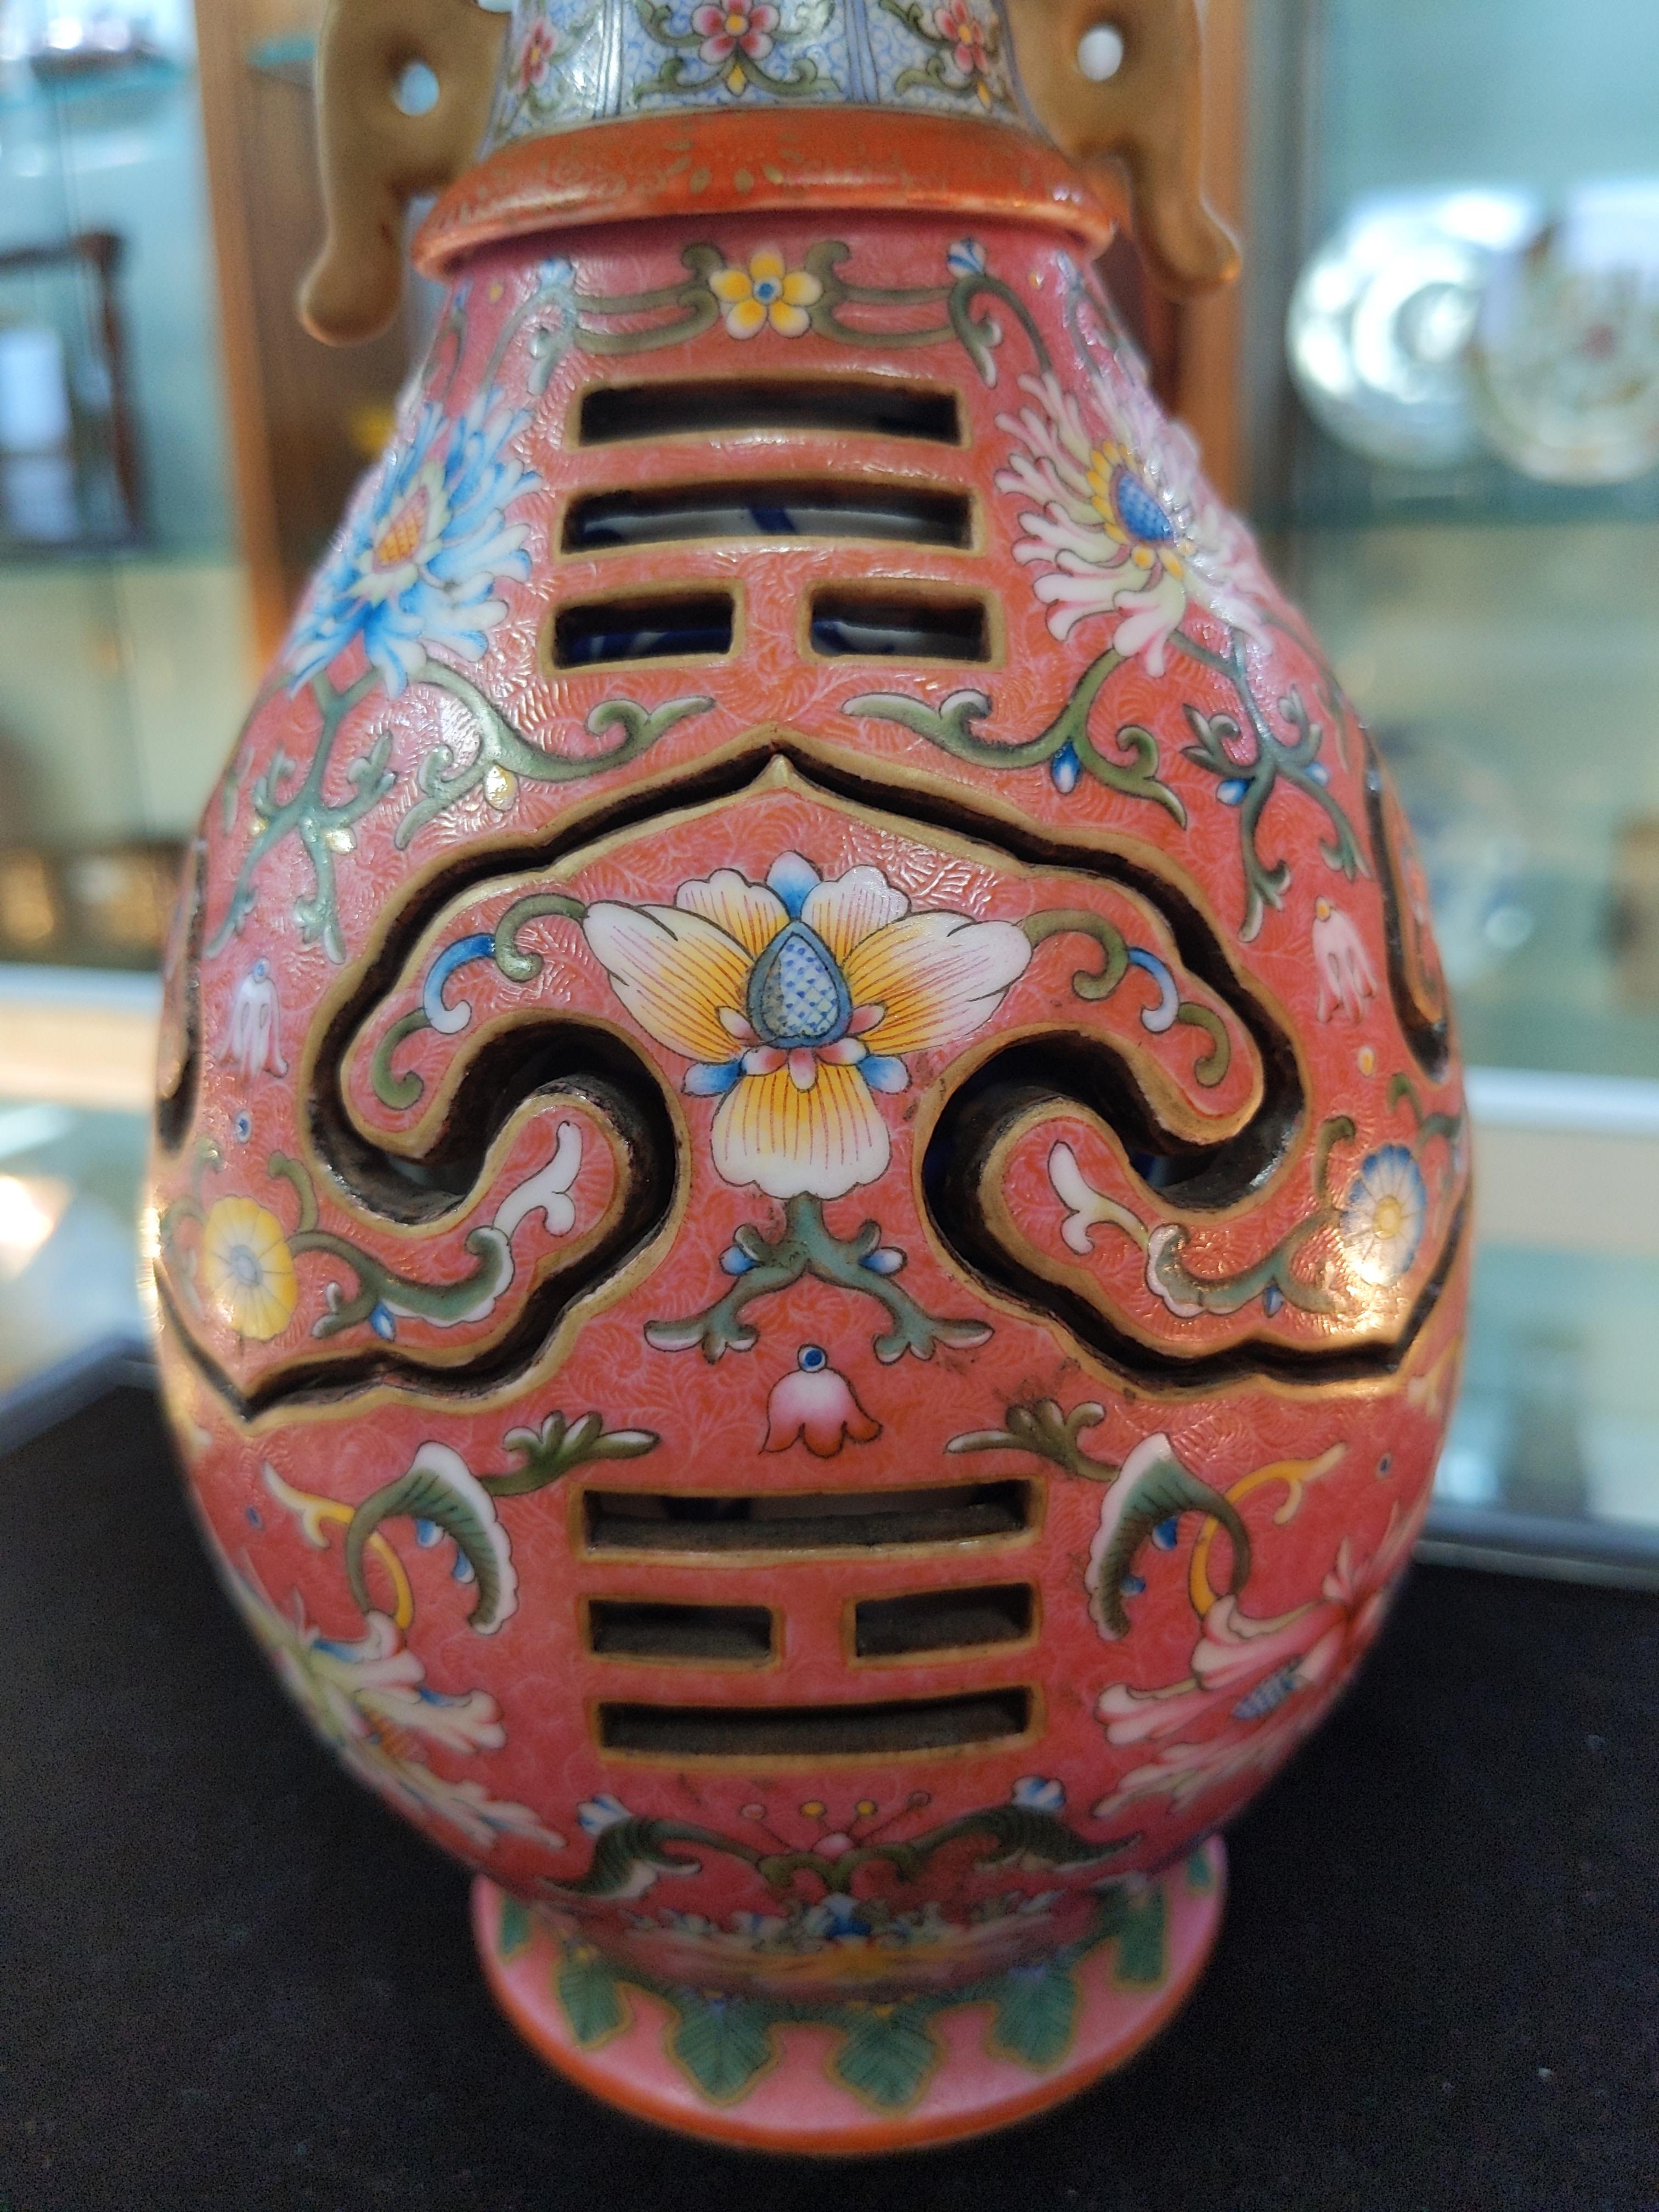 A RARE CHINESE REVOLVING VASE - Image 12 of 14